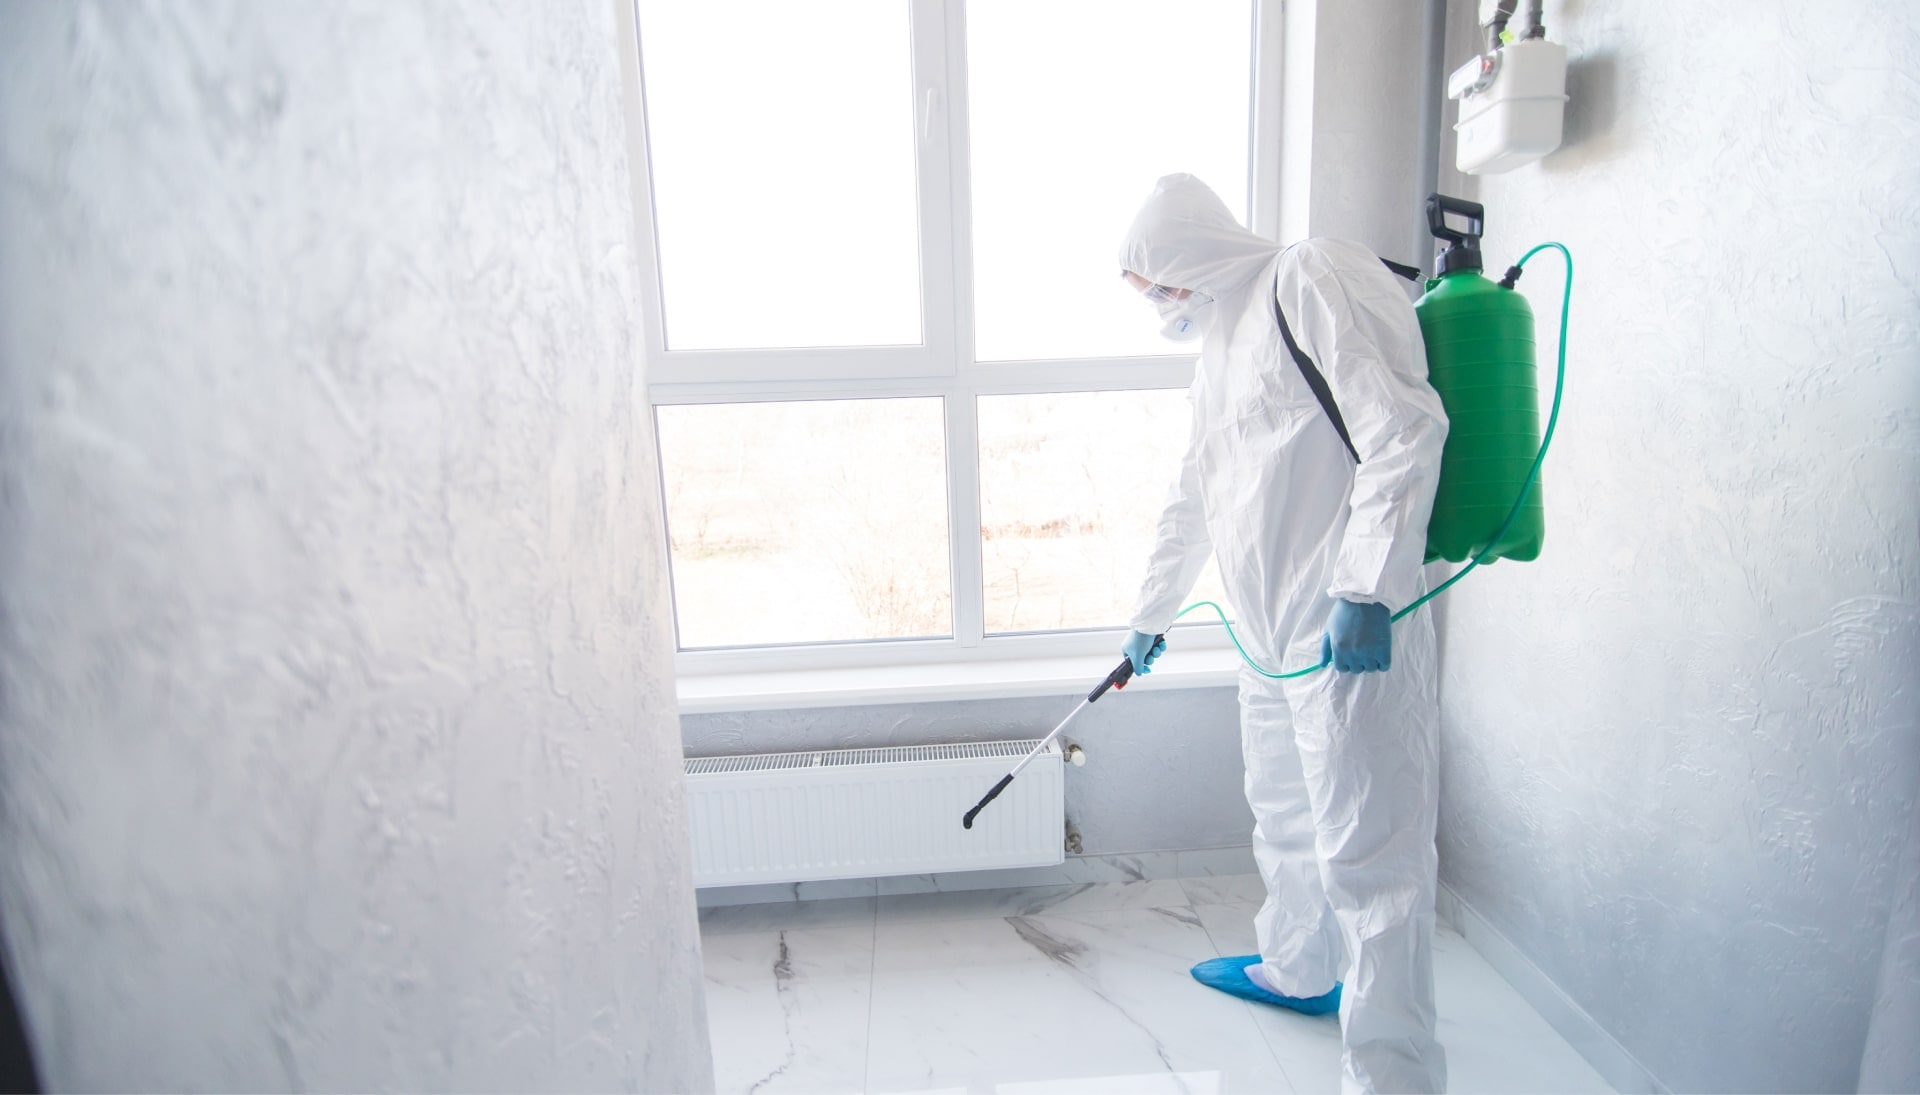 We provide the highest-quality mold inspection, testing, and removal services in the Winston-Salem, NC area.